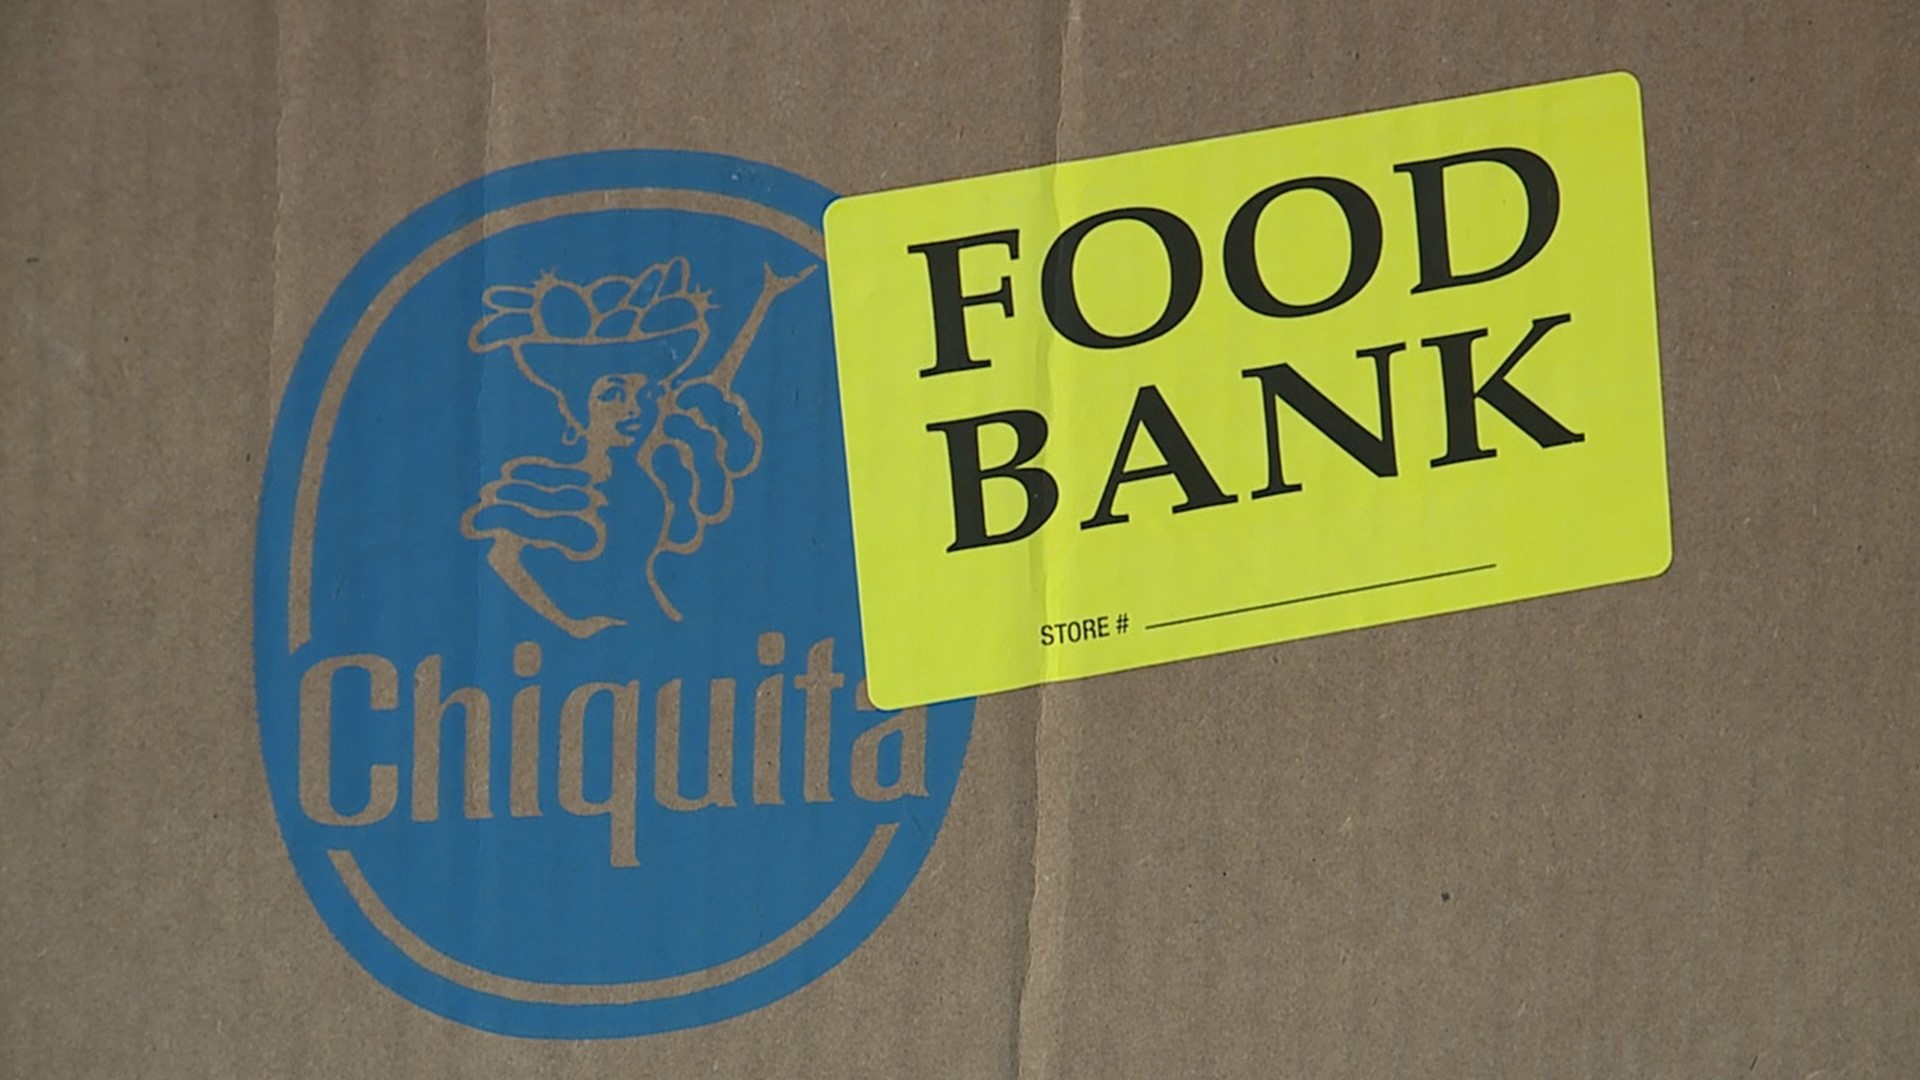 September is Hunger Action Month and food banks across central Pennsylvania hope for a rise in food donations as more awareness is generated.